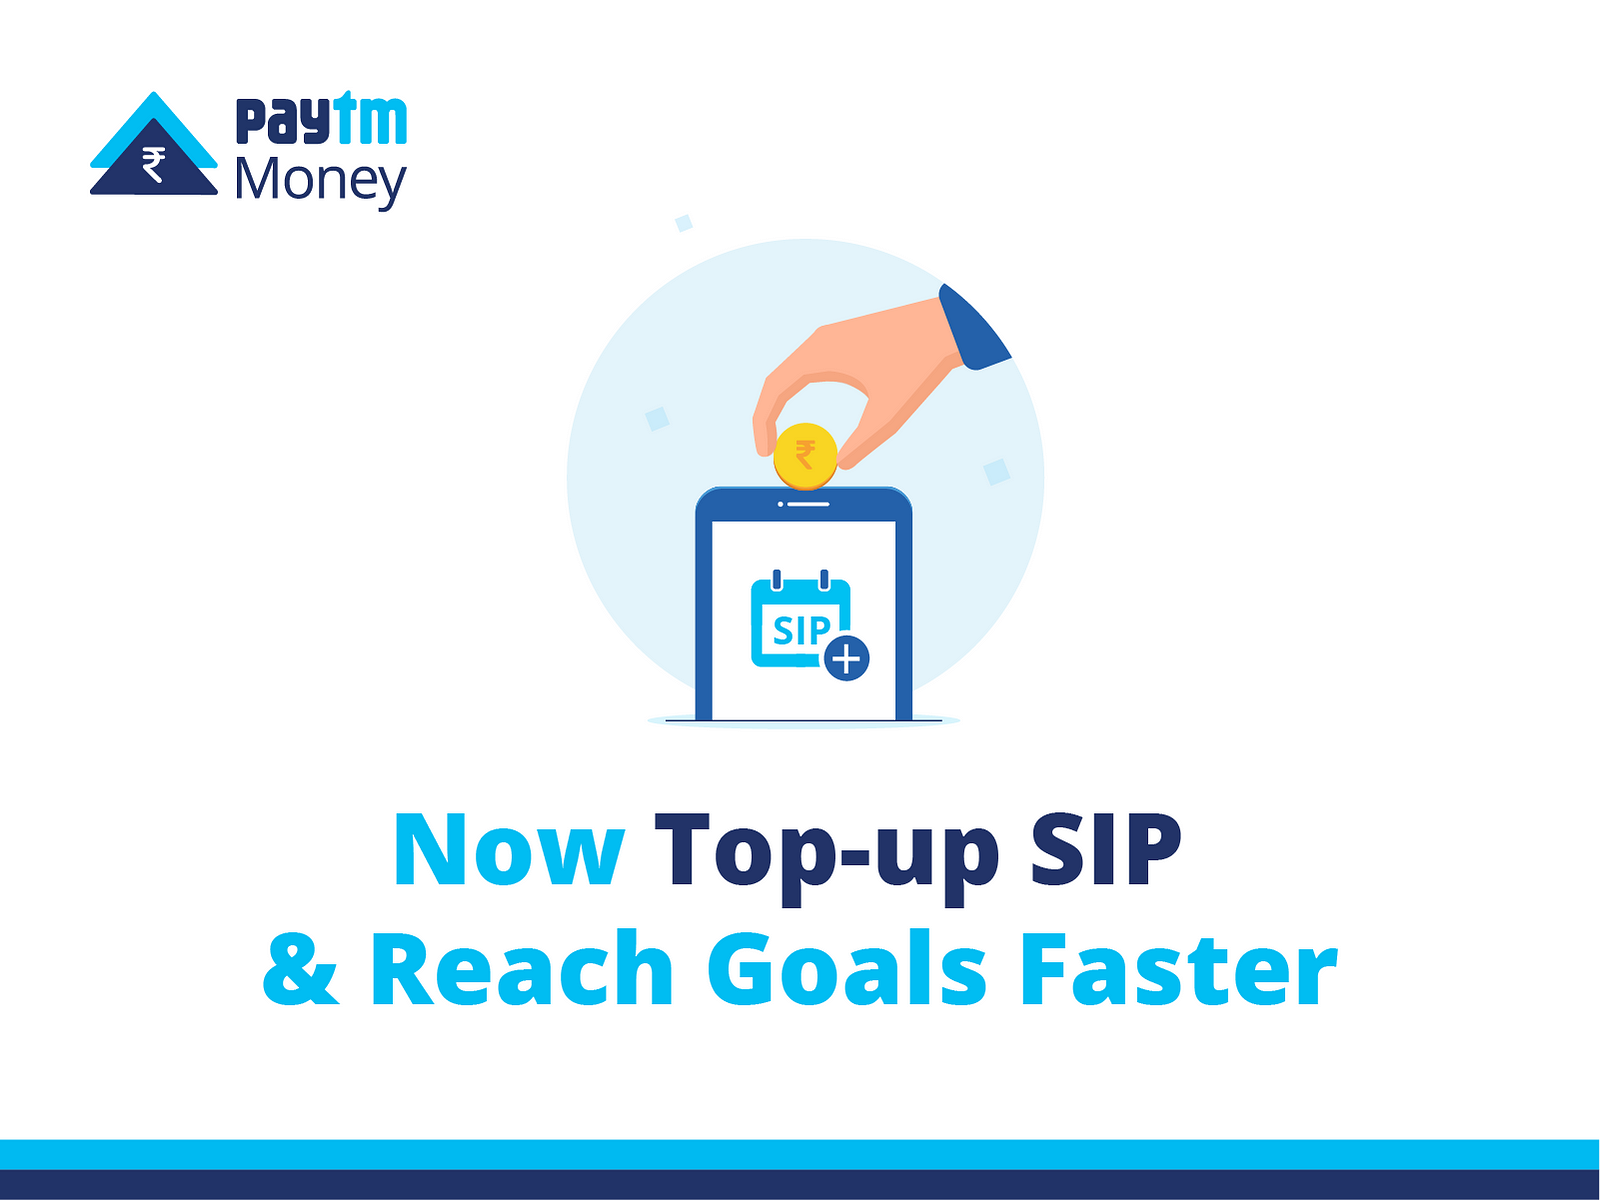 Introdu!   cing Easy Top Up For Sips Paytm Money Medium - most of our investors lo!   ve the simplicity ease of managing sips systematic investment plans on paytm money we actively listen to all your feedback